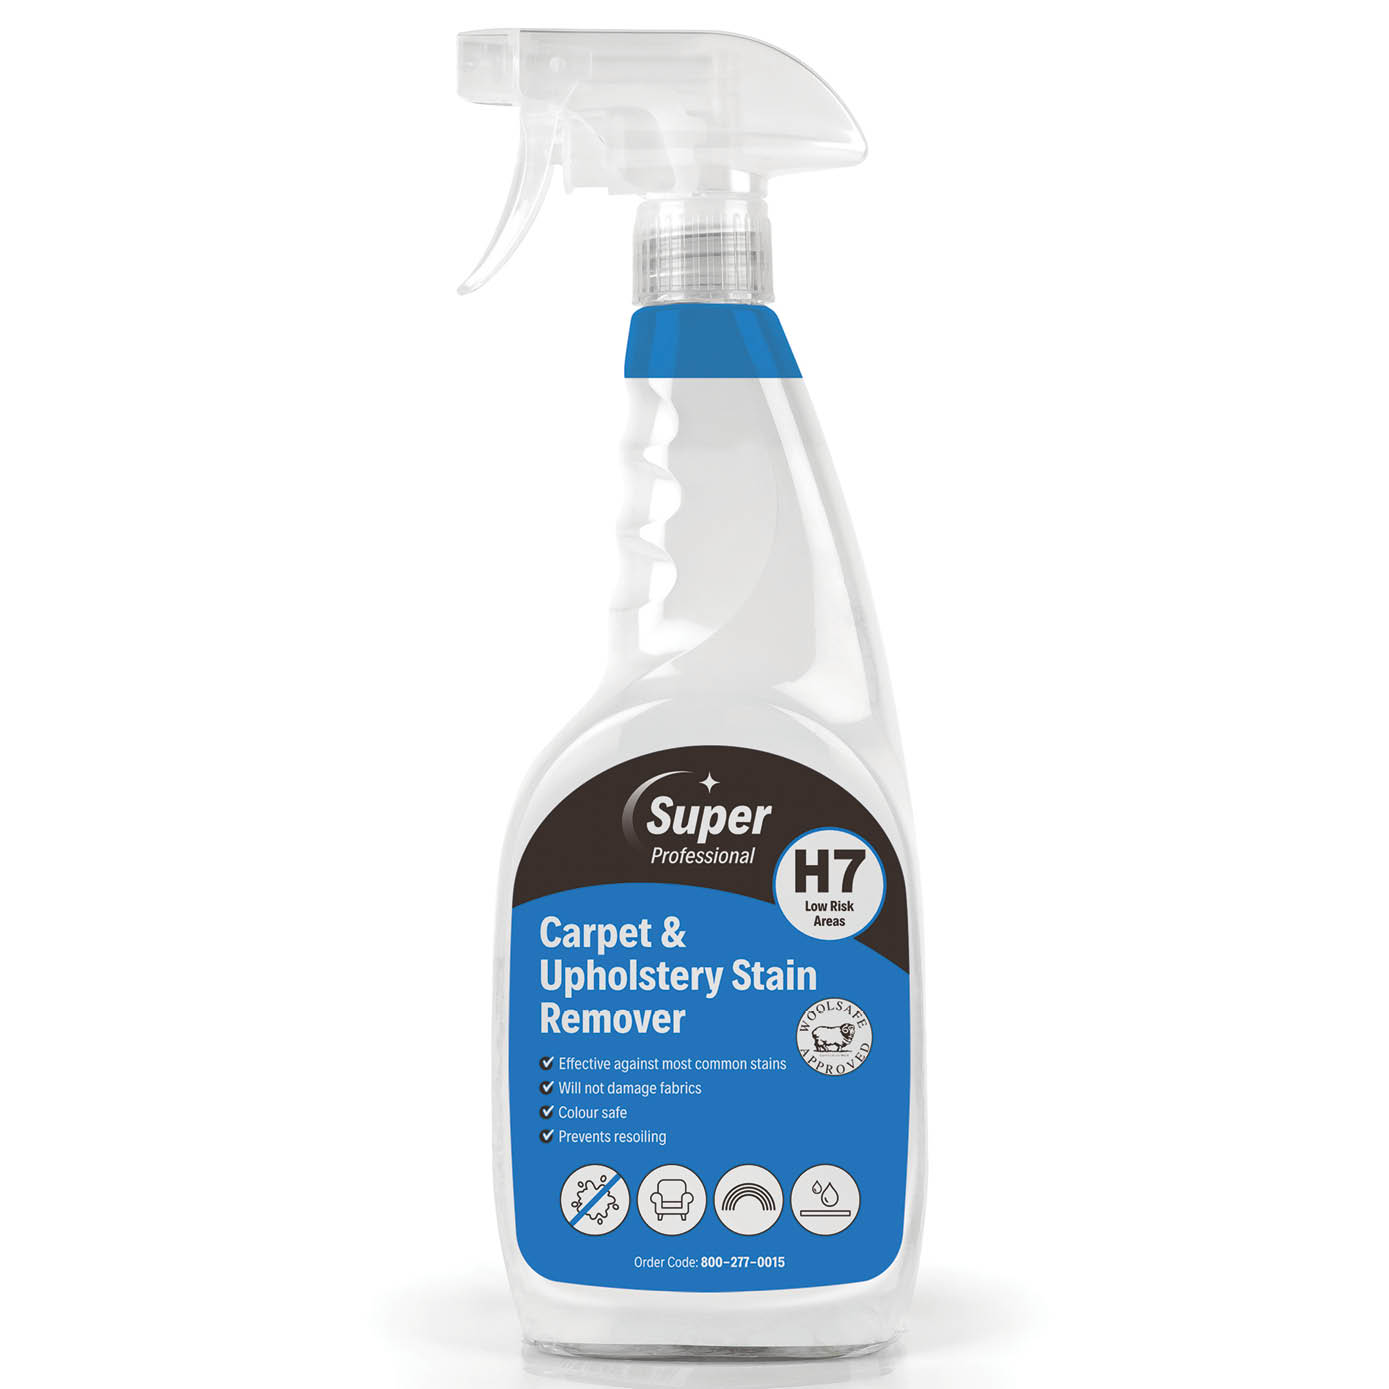 750ml JaniClean® Carpet & Upholstery Shampoo Spot Stain Remover